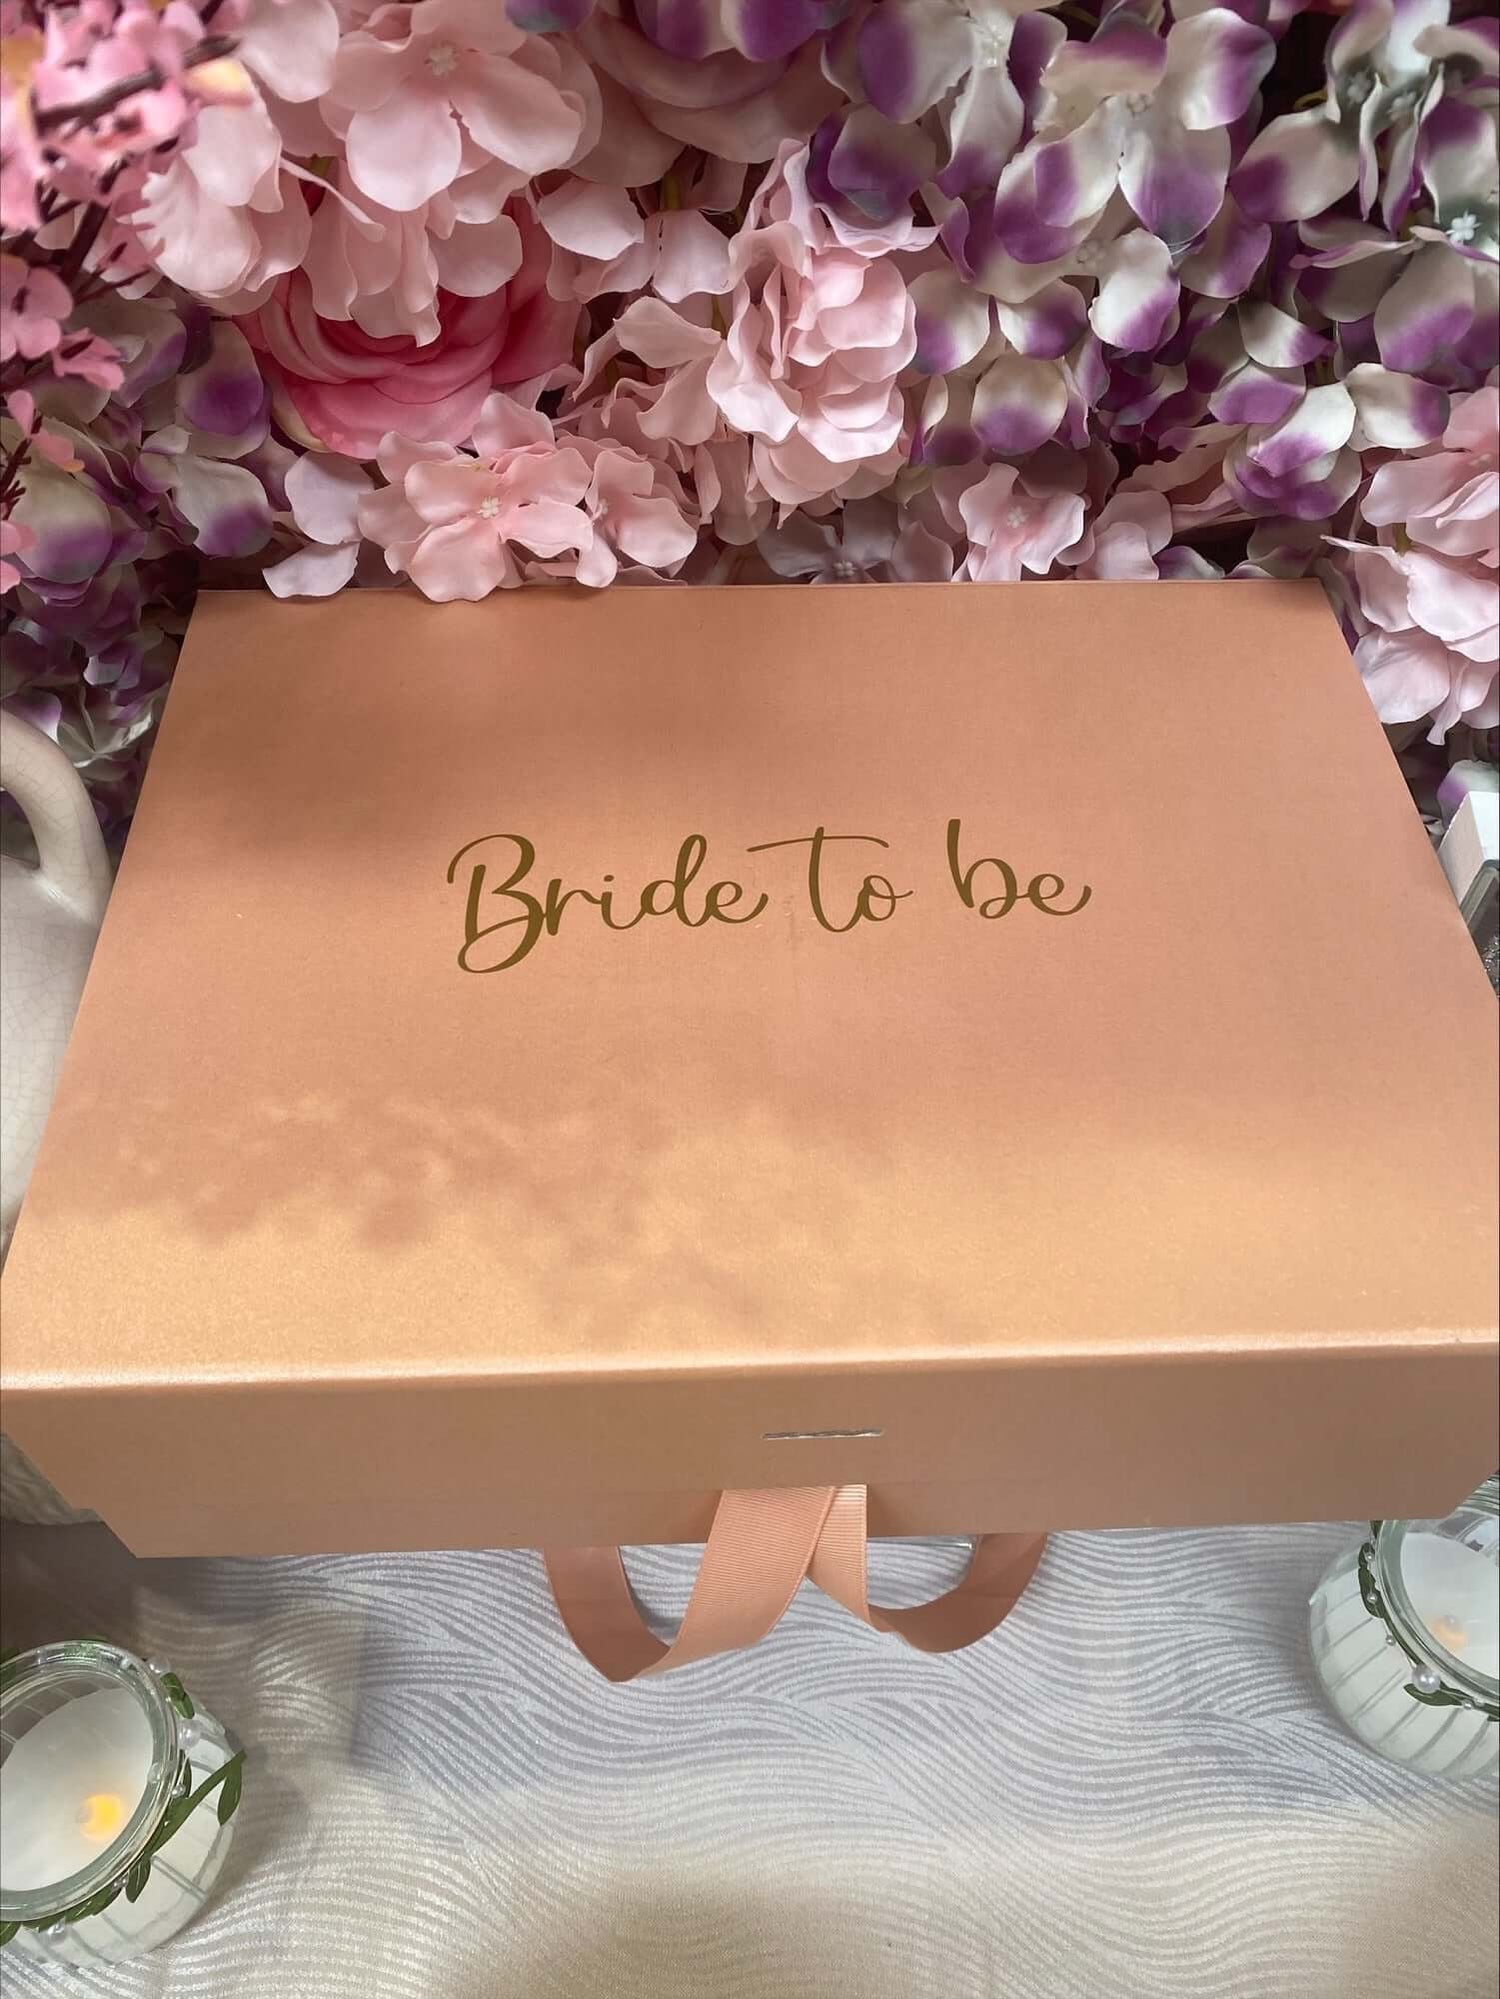  A pink gift box with "Bride to be" written in gold script on the lid is surrounded by a floral arrangement of pink and purple flowers. The personalised gift box is tied with a matching pink ribbon and displayed on a white surface